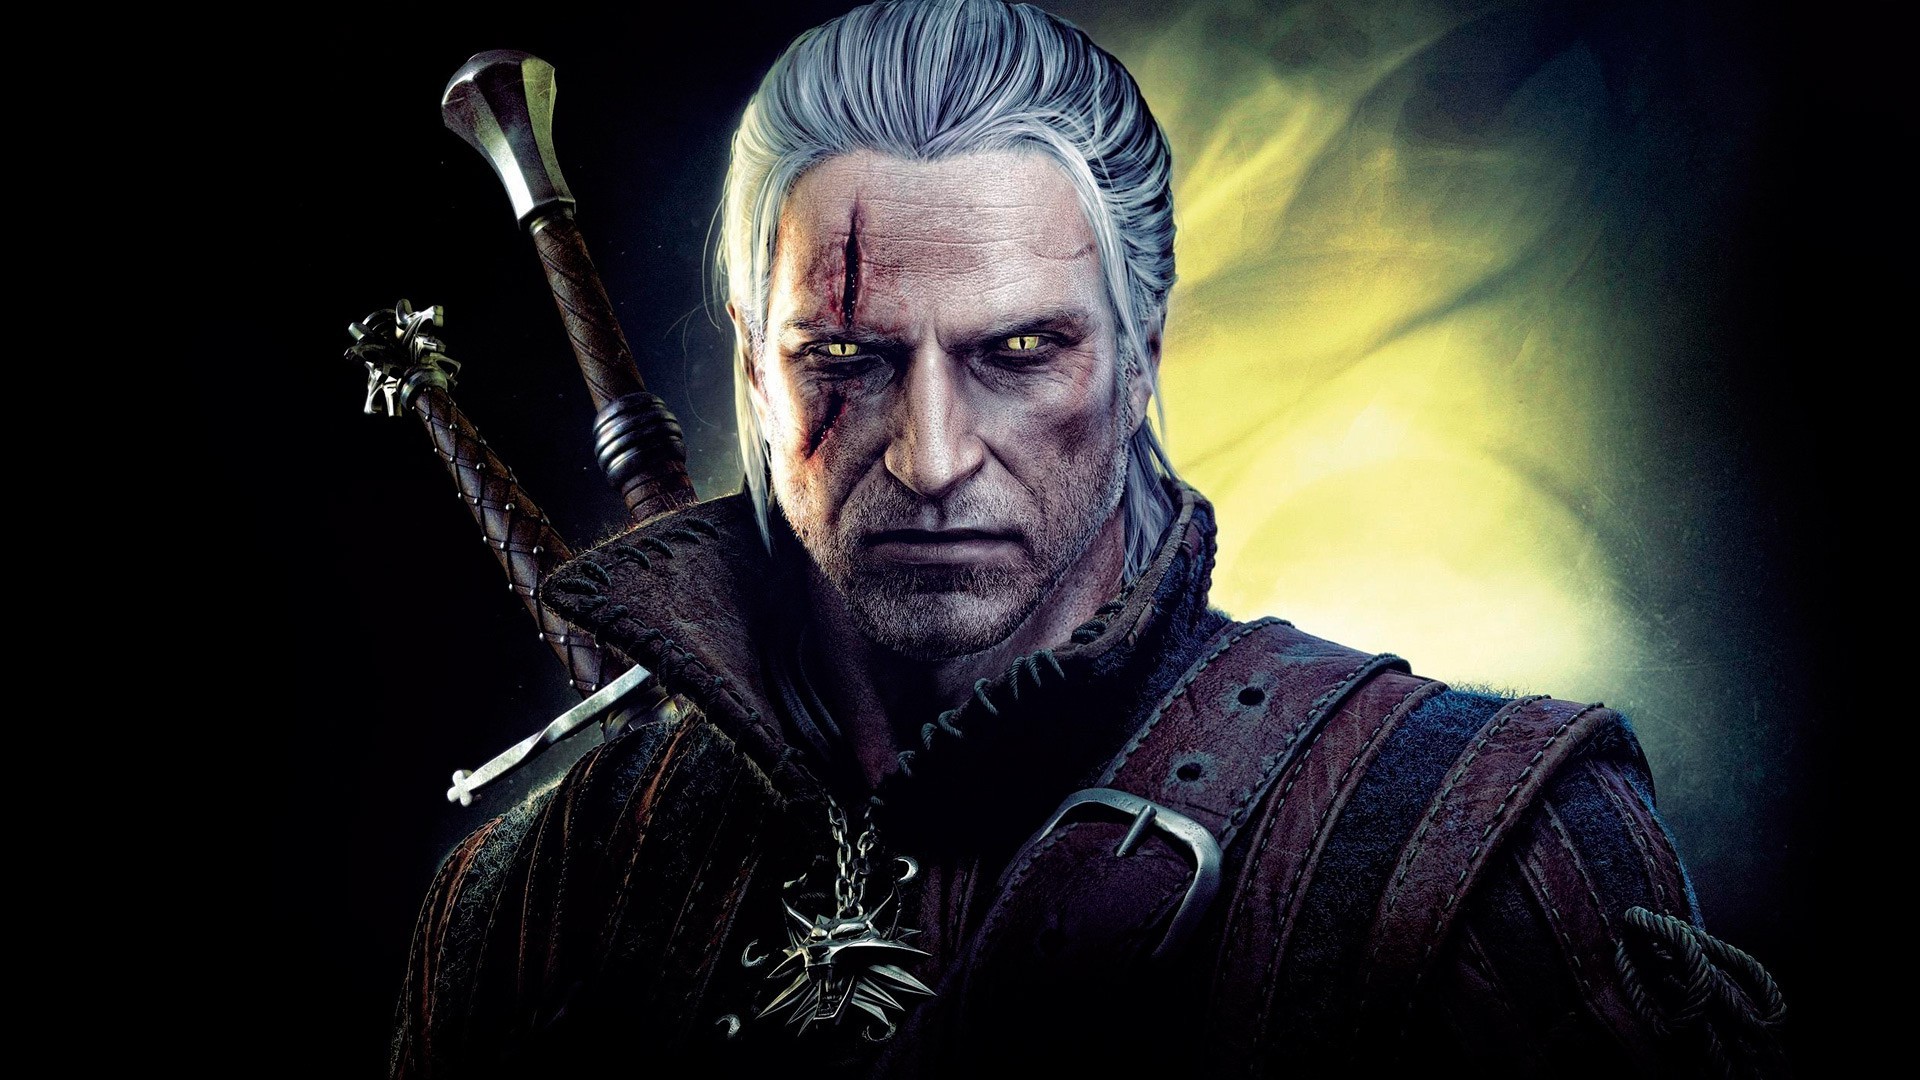 General 1920x1080 The Witcher The Witcher 2: Assassins of Kings Geralt of Rivia video games PC gaming fantasy men RPG